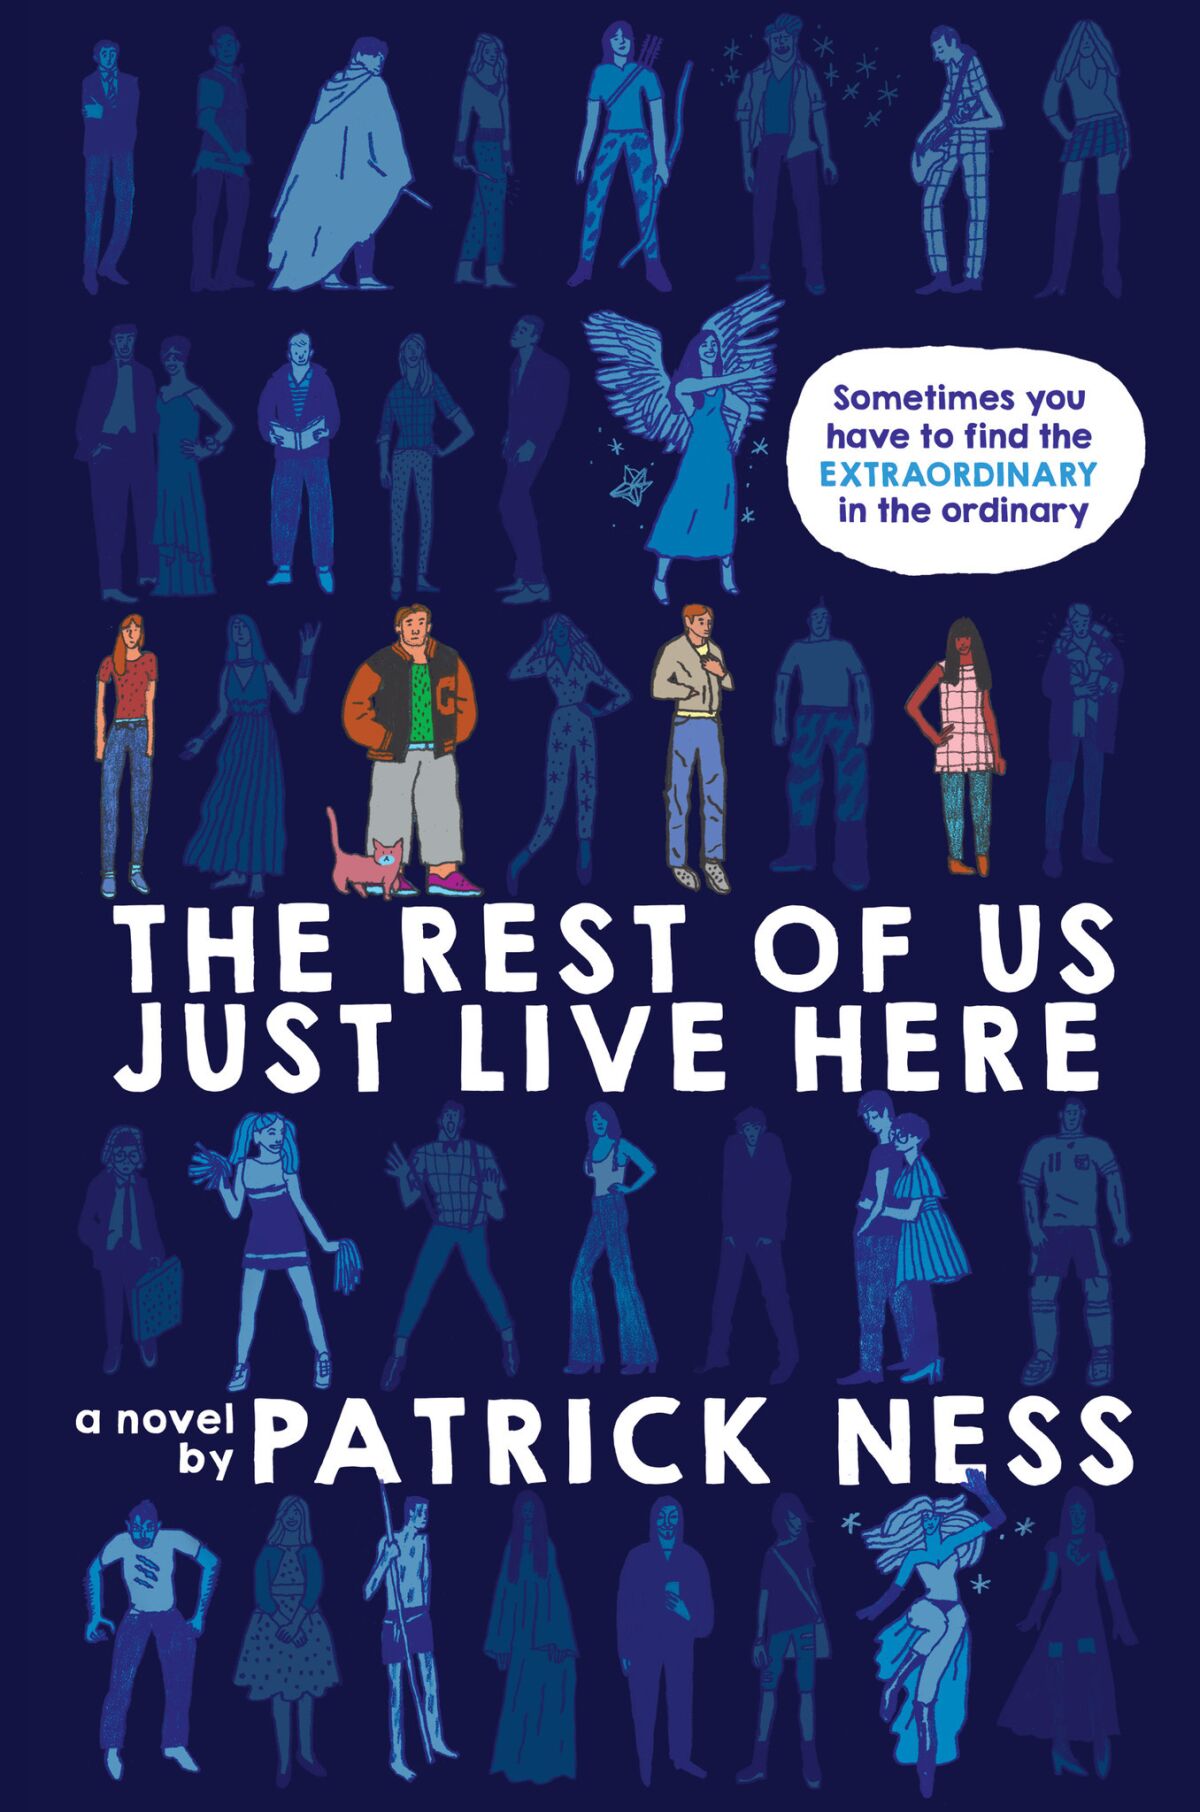 "The Rest of Us Just Live Here" by Patrick Ness